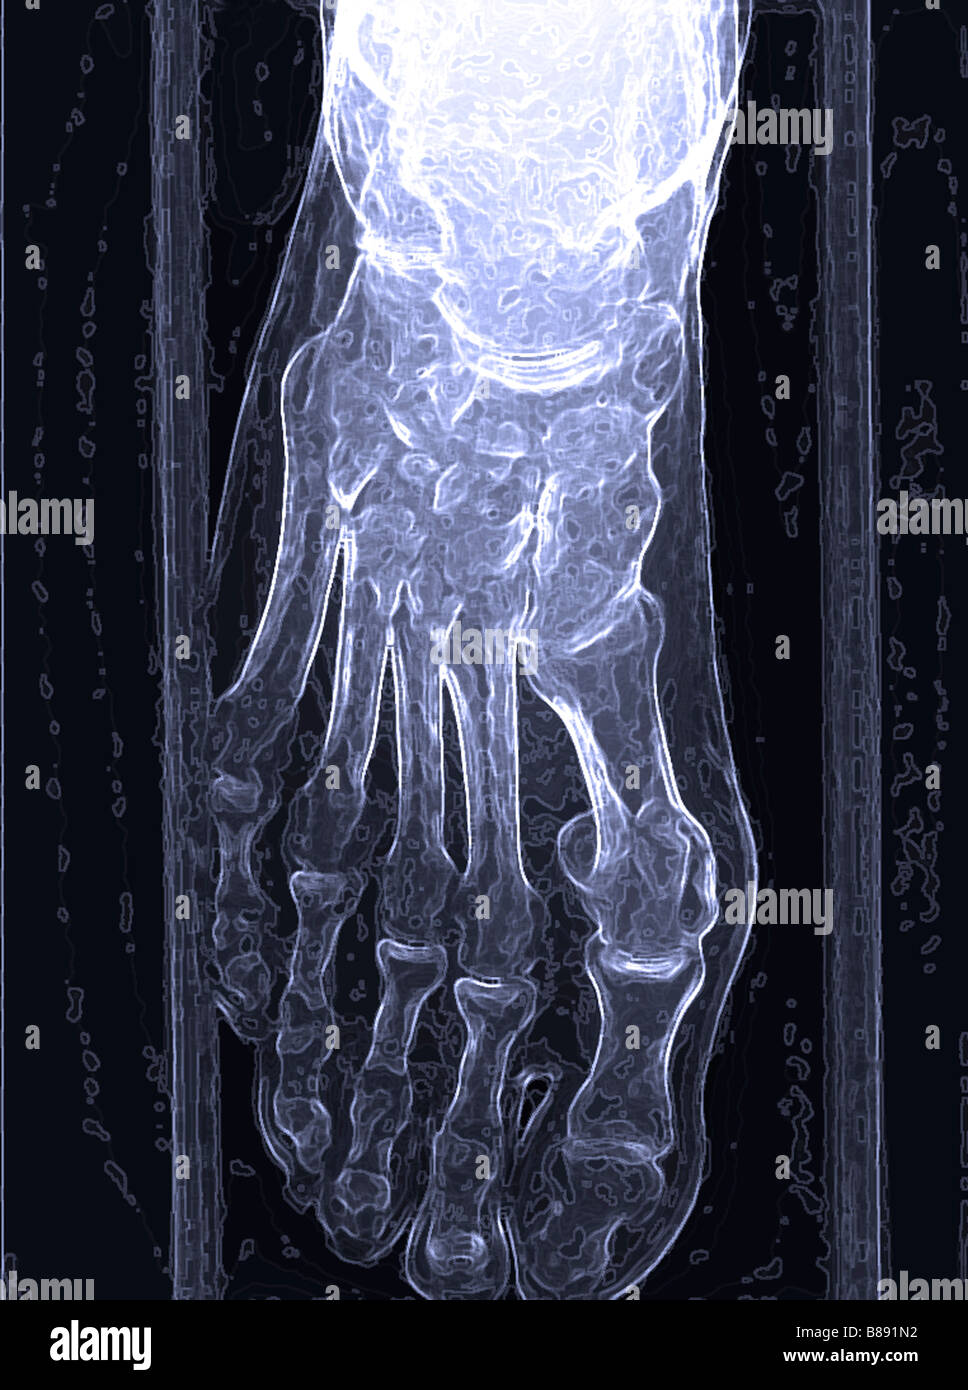 Illustration of an Xray of a human foot Stock Photo